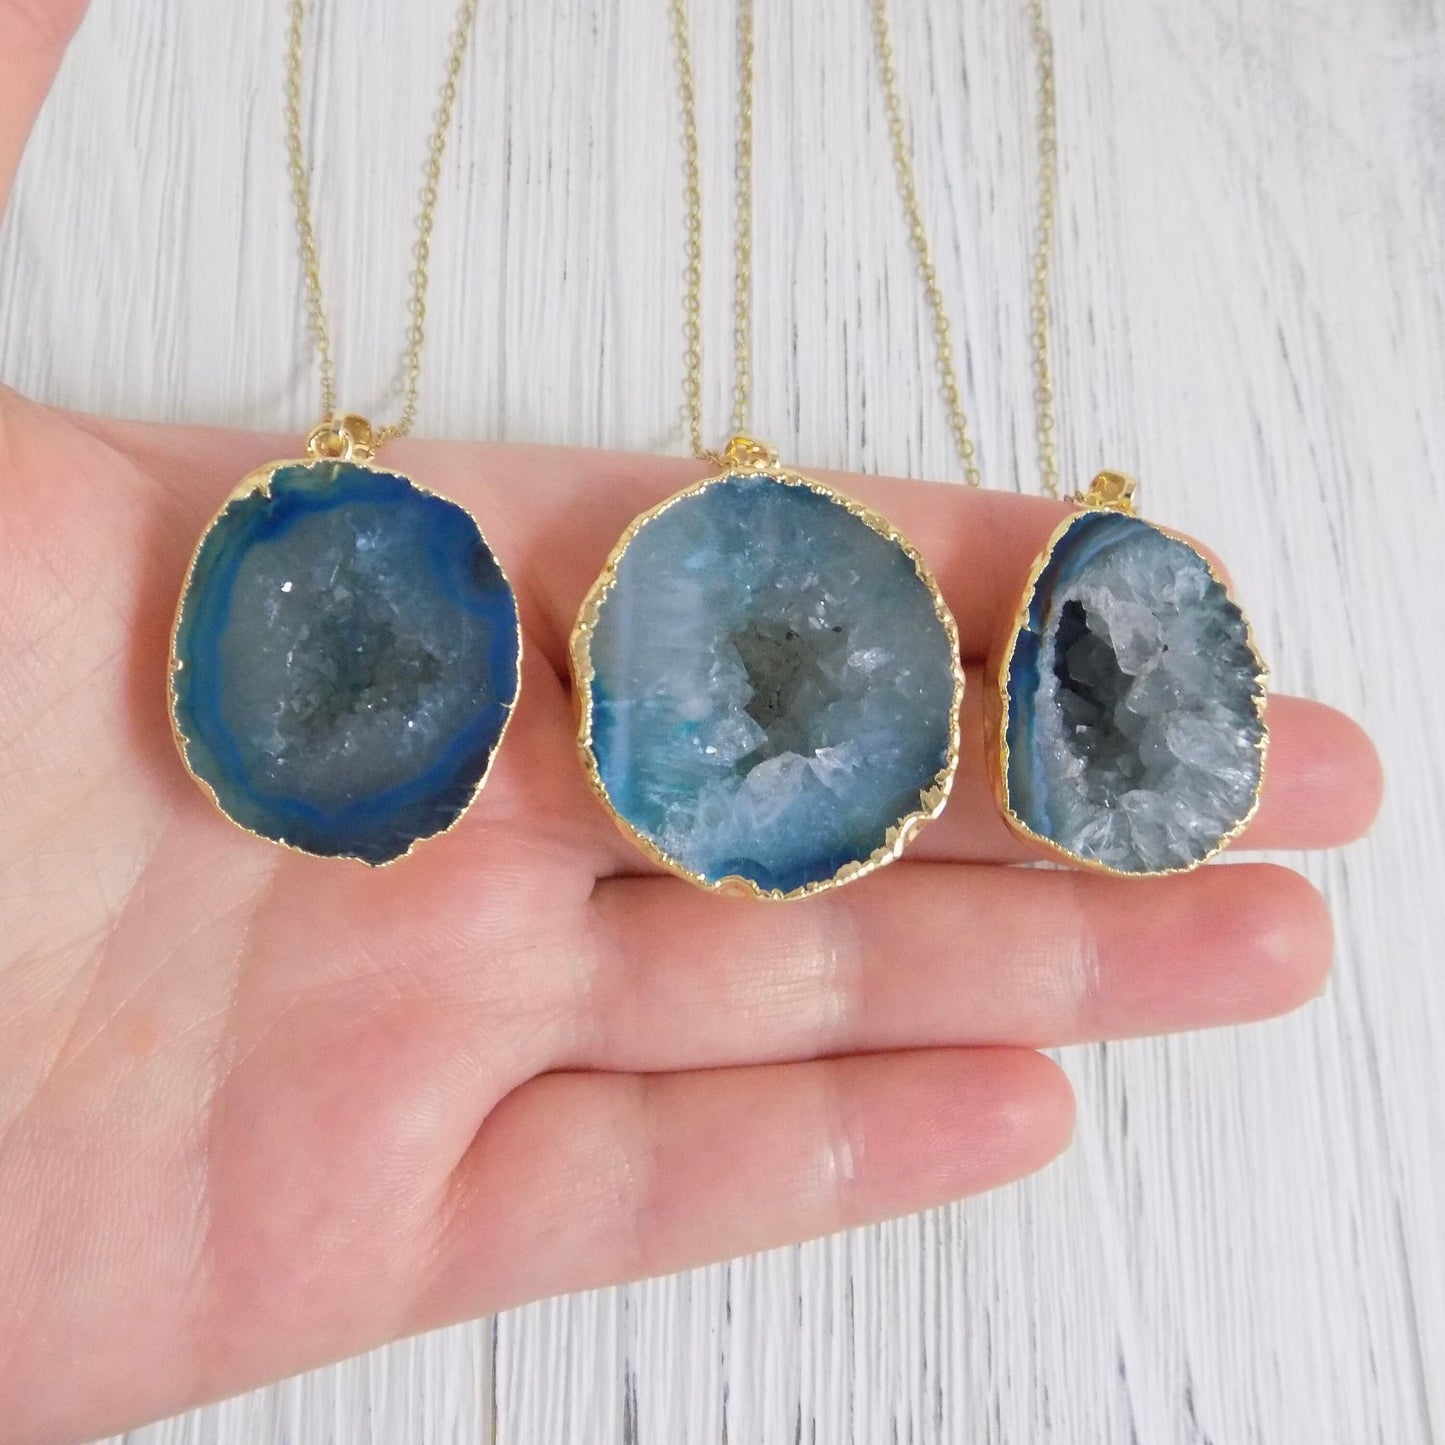 Small Geode Necklace - Teal Geode